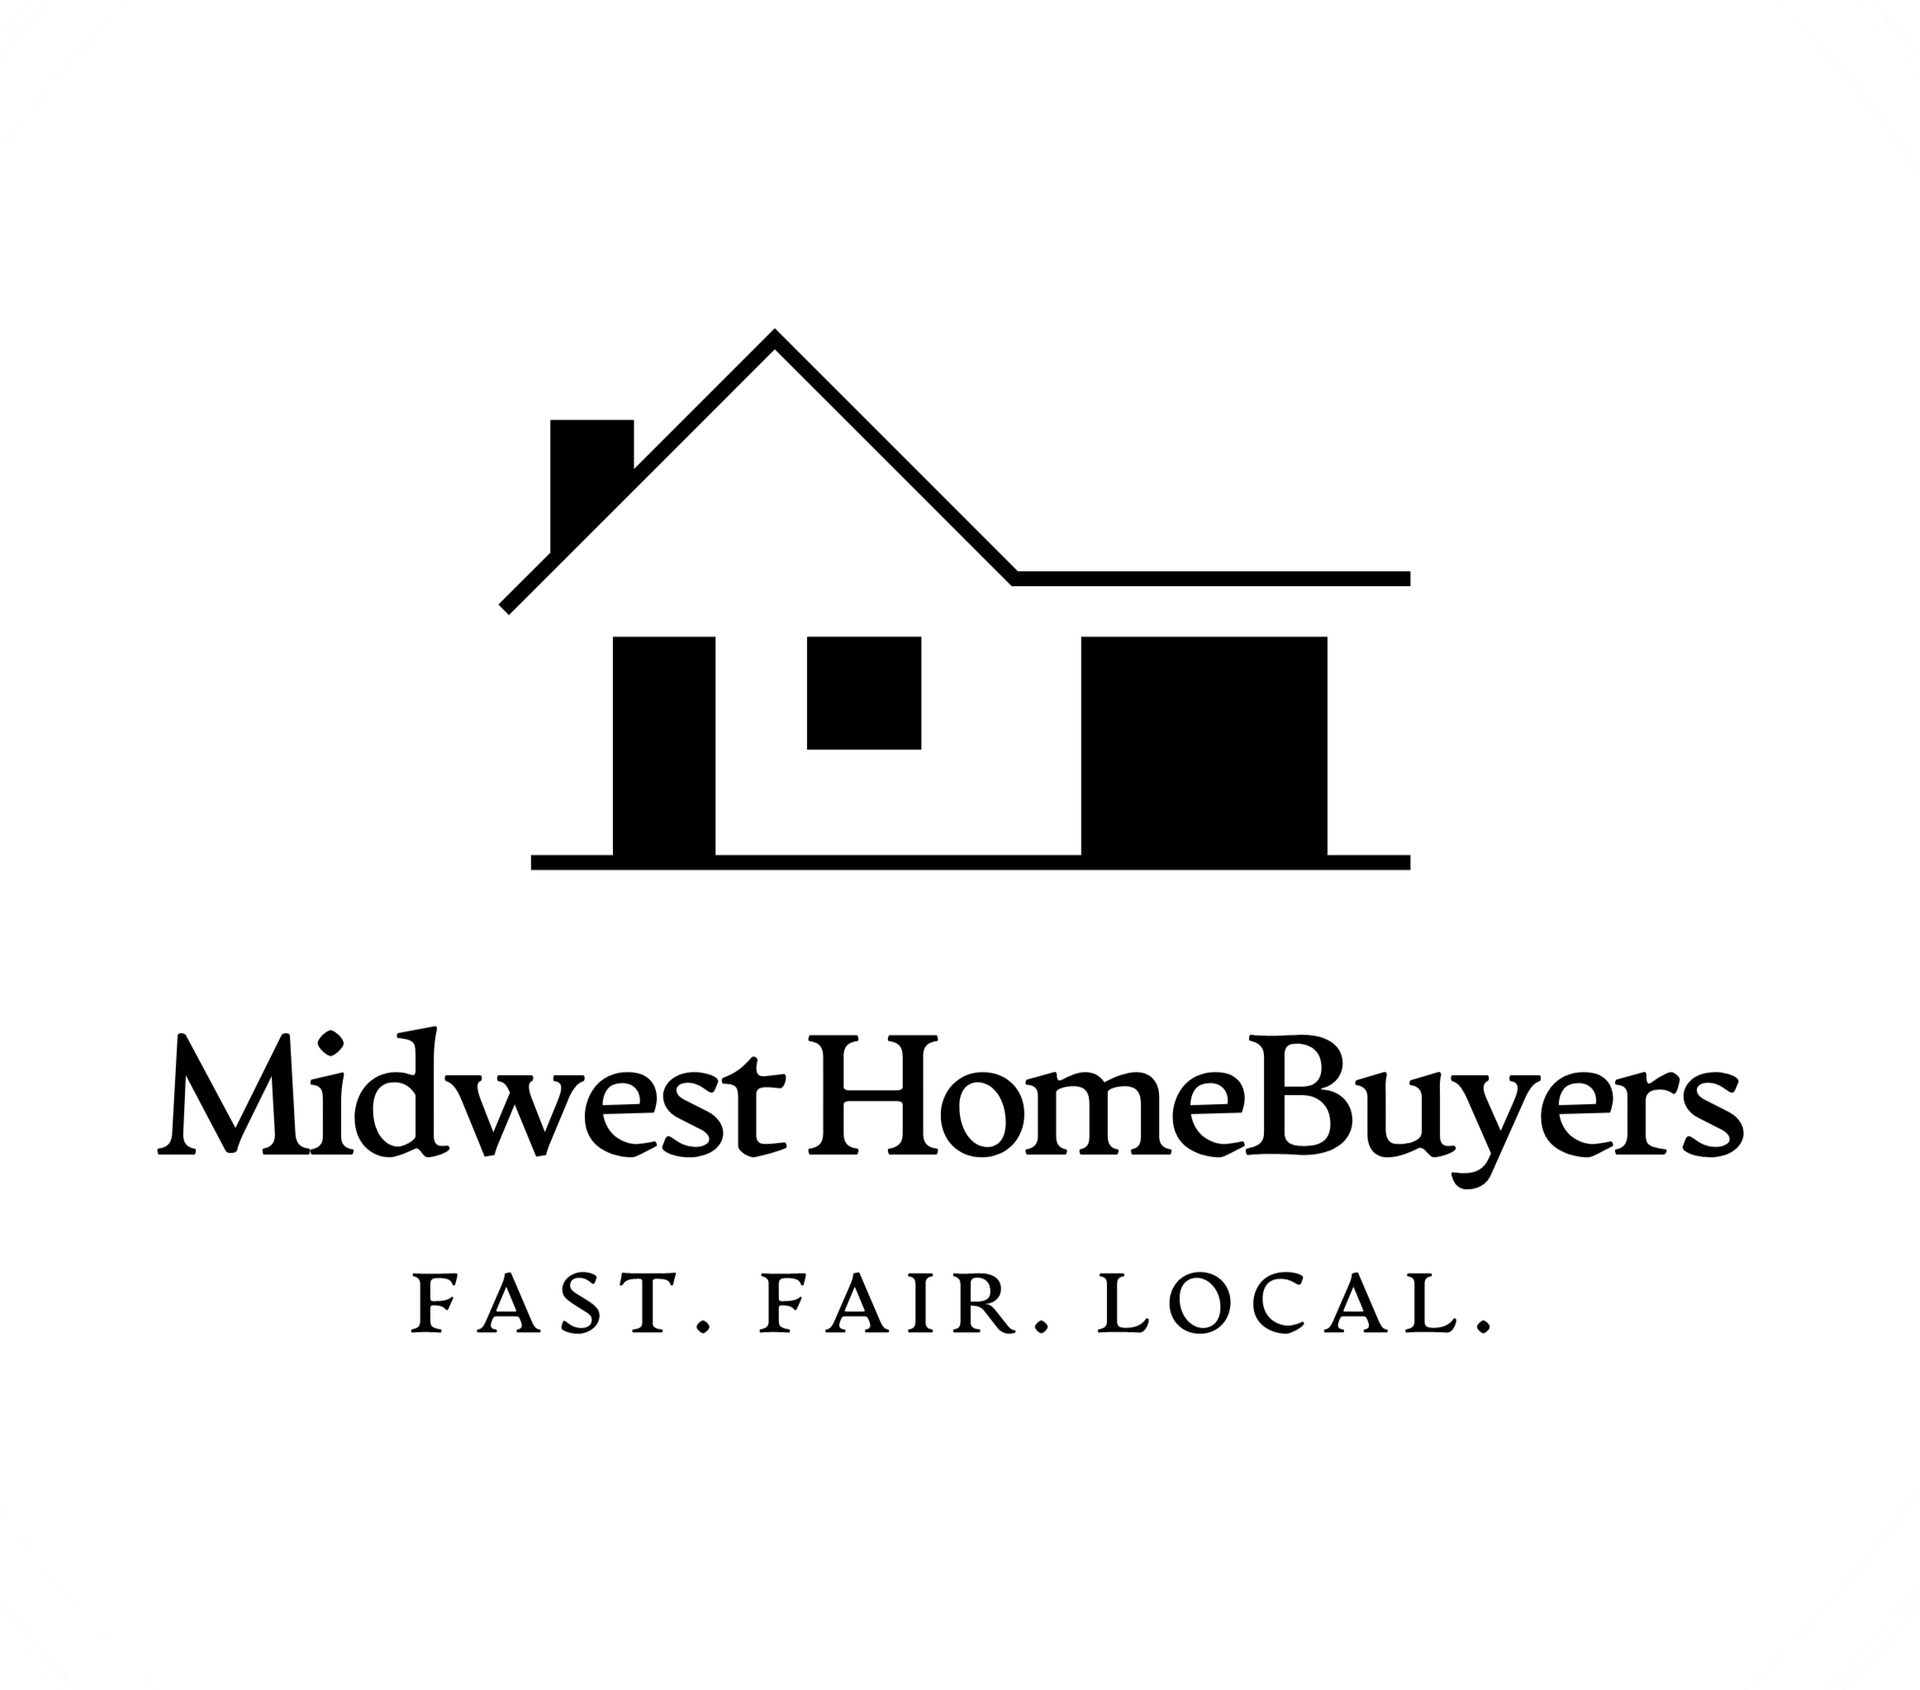 The logo for bateman home buyers has a blue house on it